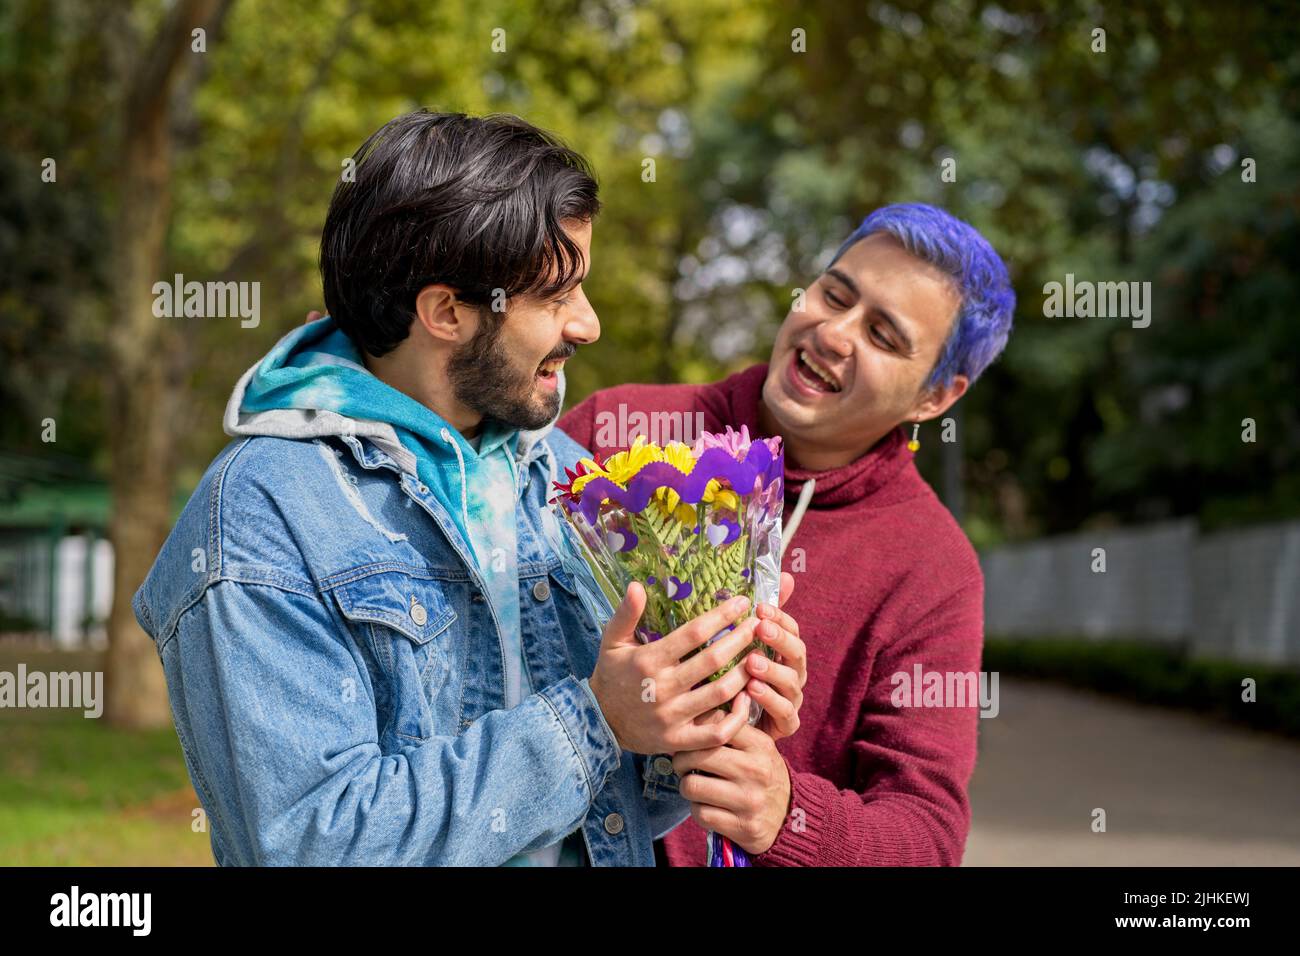 Couple of Latino gay men in a park embracing each other. One surprising the other with a bouquet of flowers as a gift Stock Photo